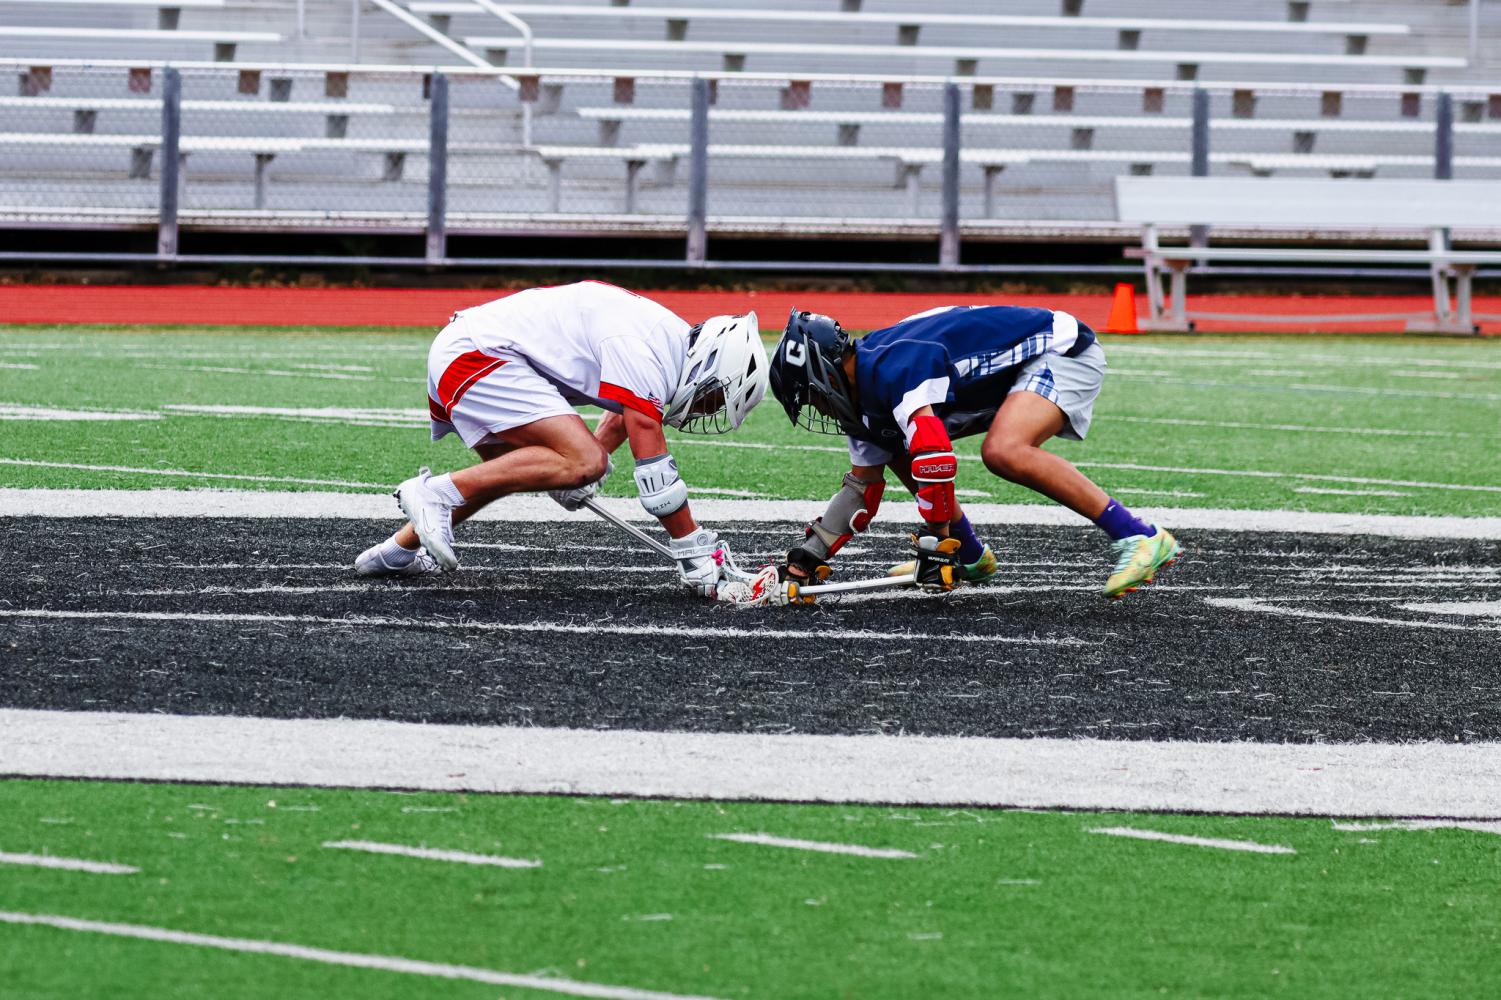 Boys+varsity+lacrosse+clinches+emphatic+first+win+in+league+play